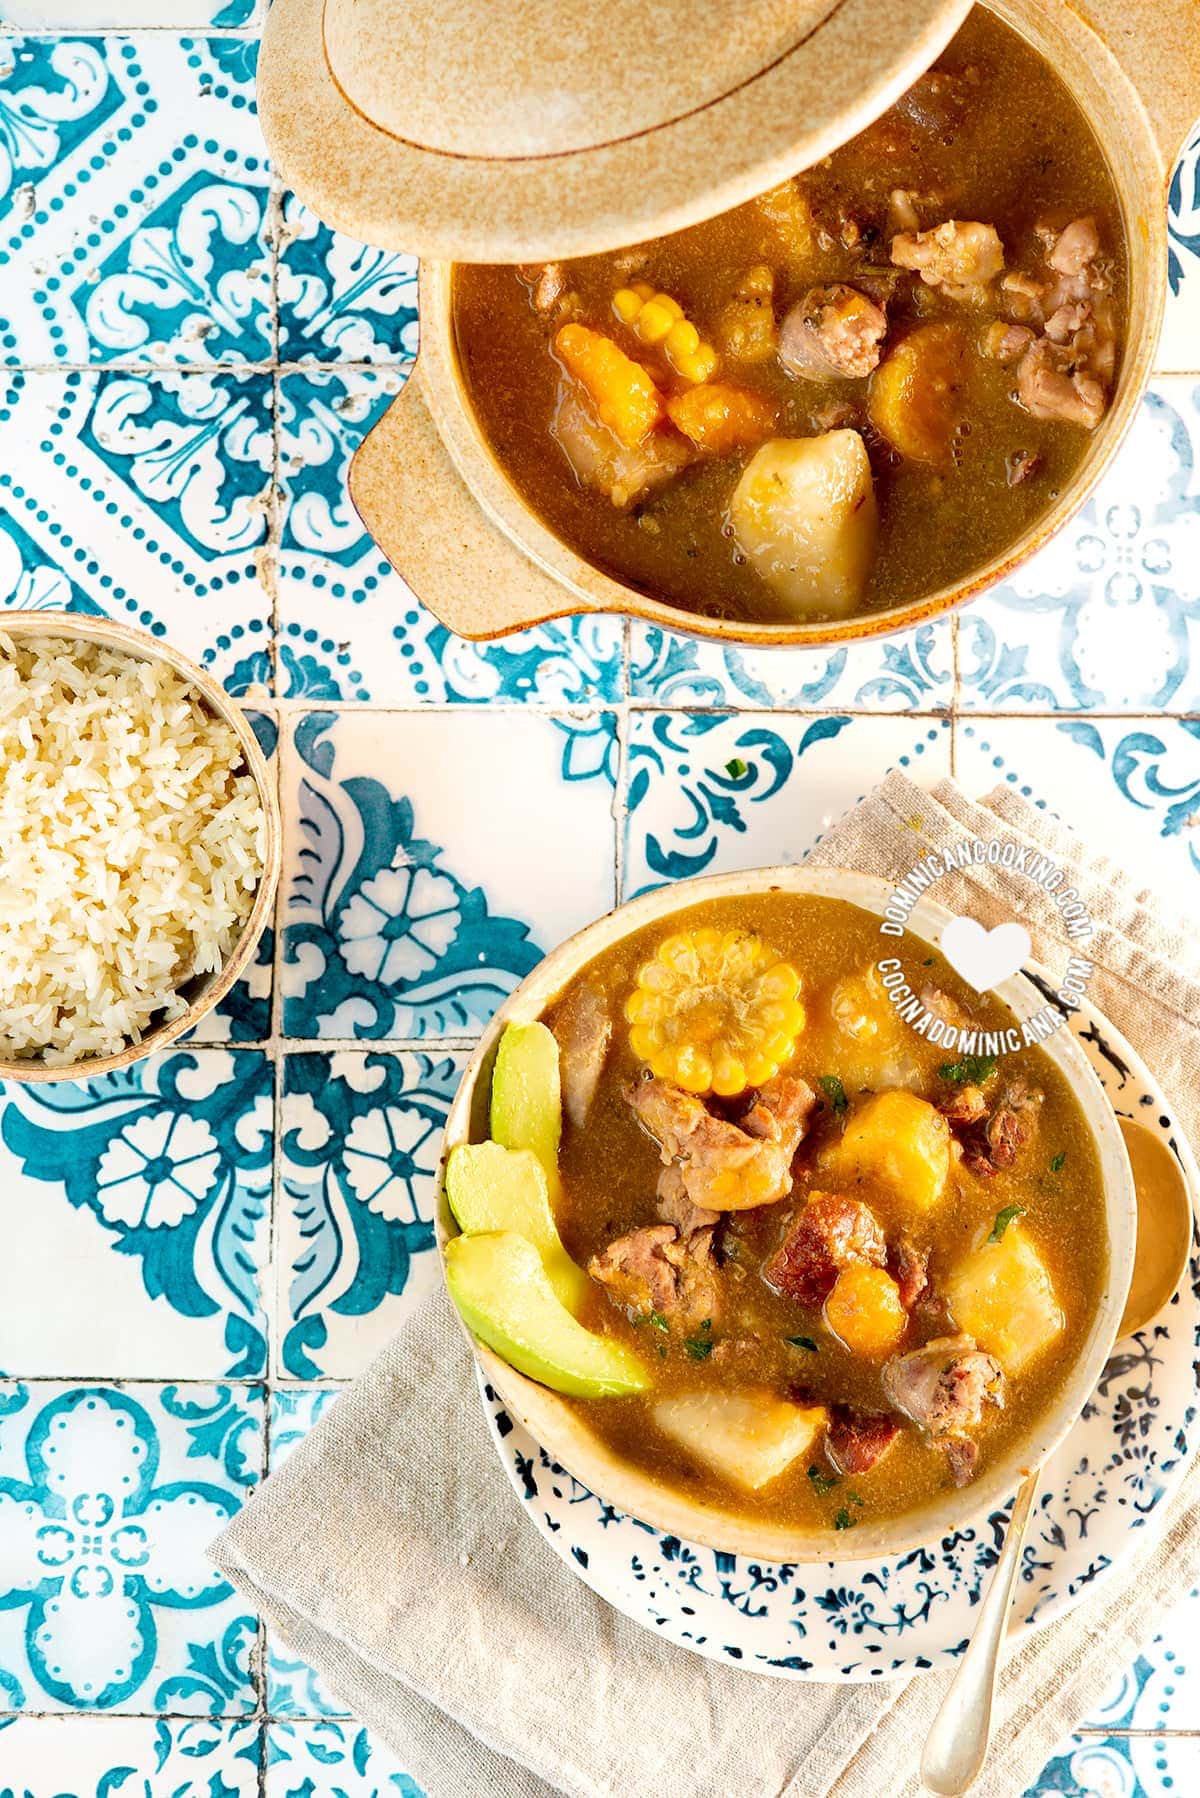 Sancocho de Siete Carnes (Seven Meat Stew) served with rice and avocado